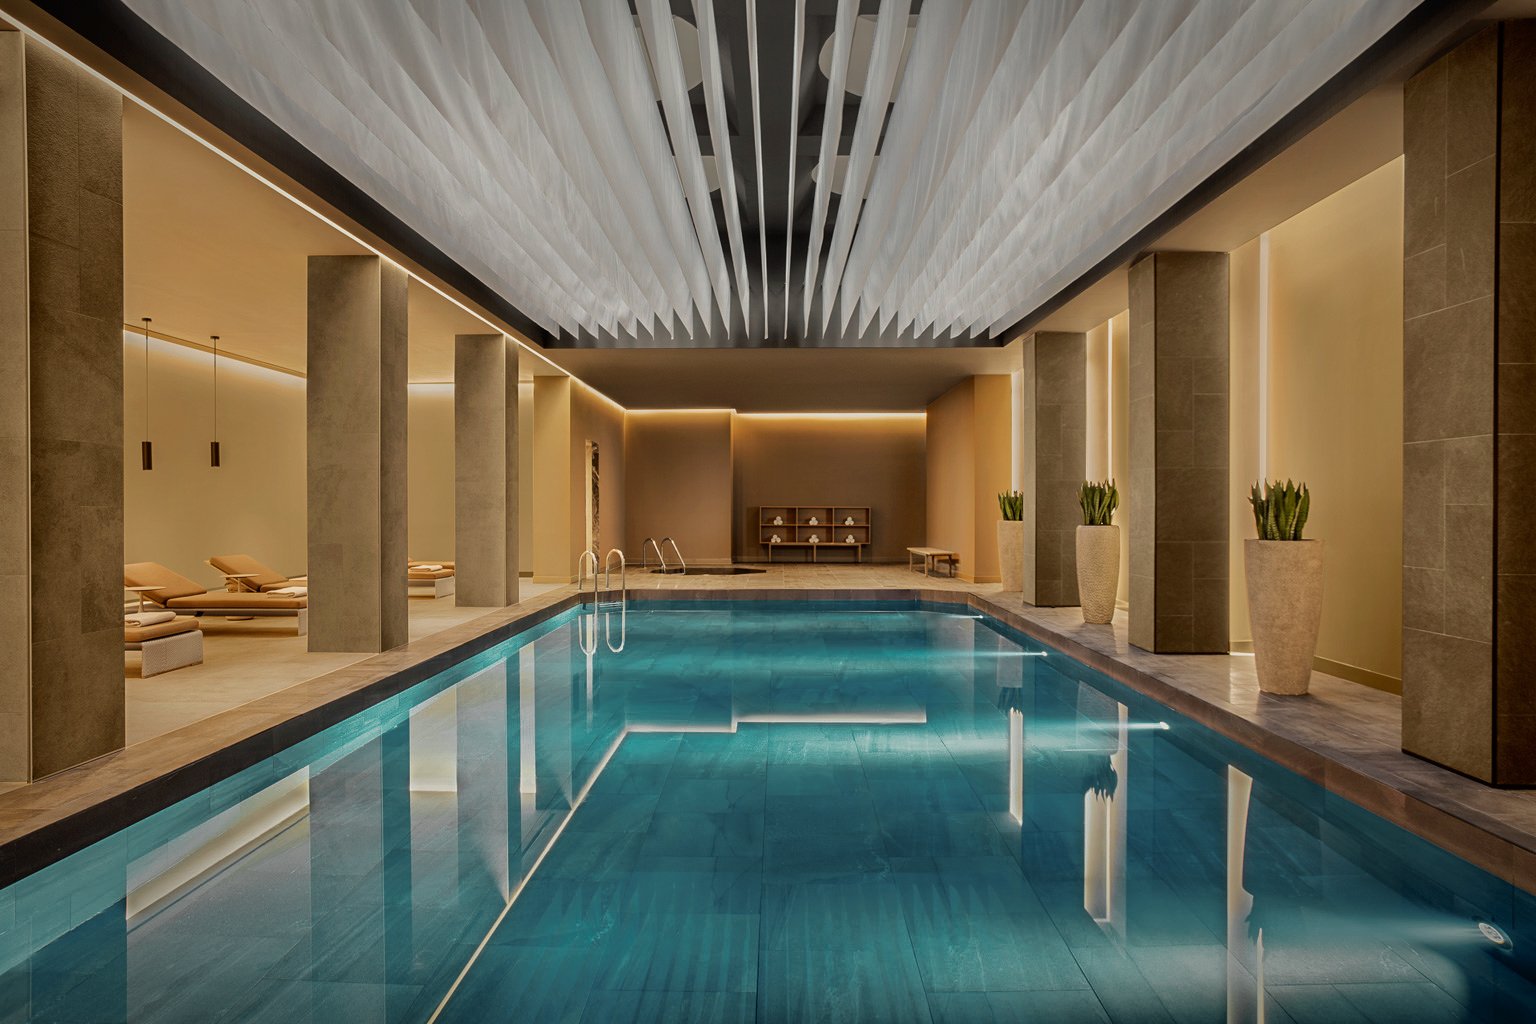 Immerse yourself in exclusive care. Spa Soul at Conrad Istanbul Bosphorus.... 
.
Kendinizi &ouml;zel bakıma bırakın. Spa Soul at Conrad Istanbul Bosphorus...
.
@conradistanbulbosphorus 
.
.
#care #spasoul